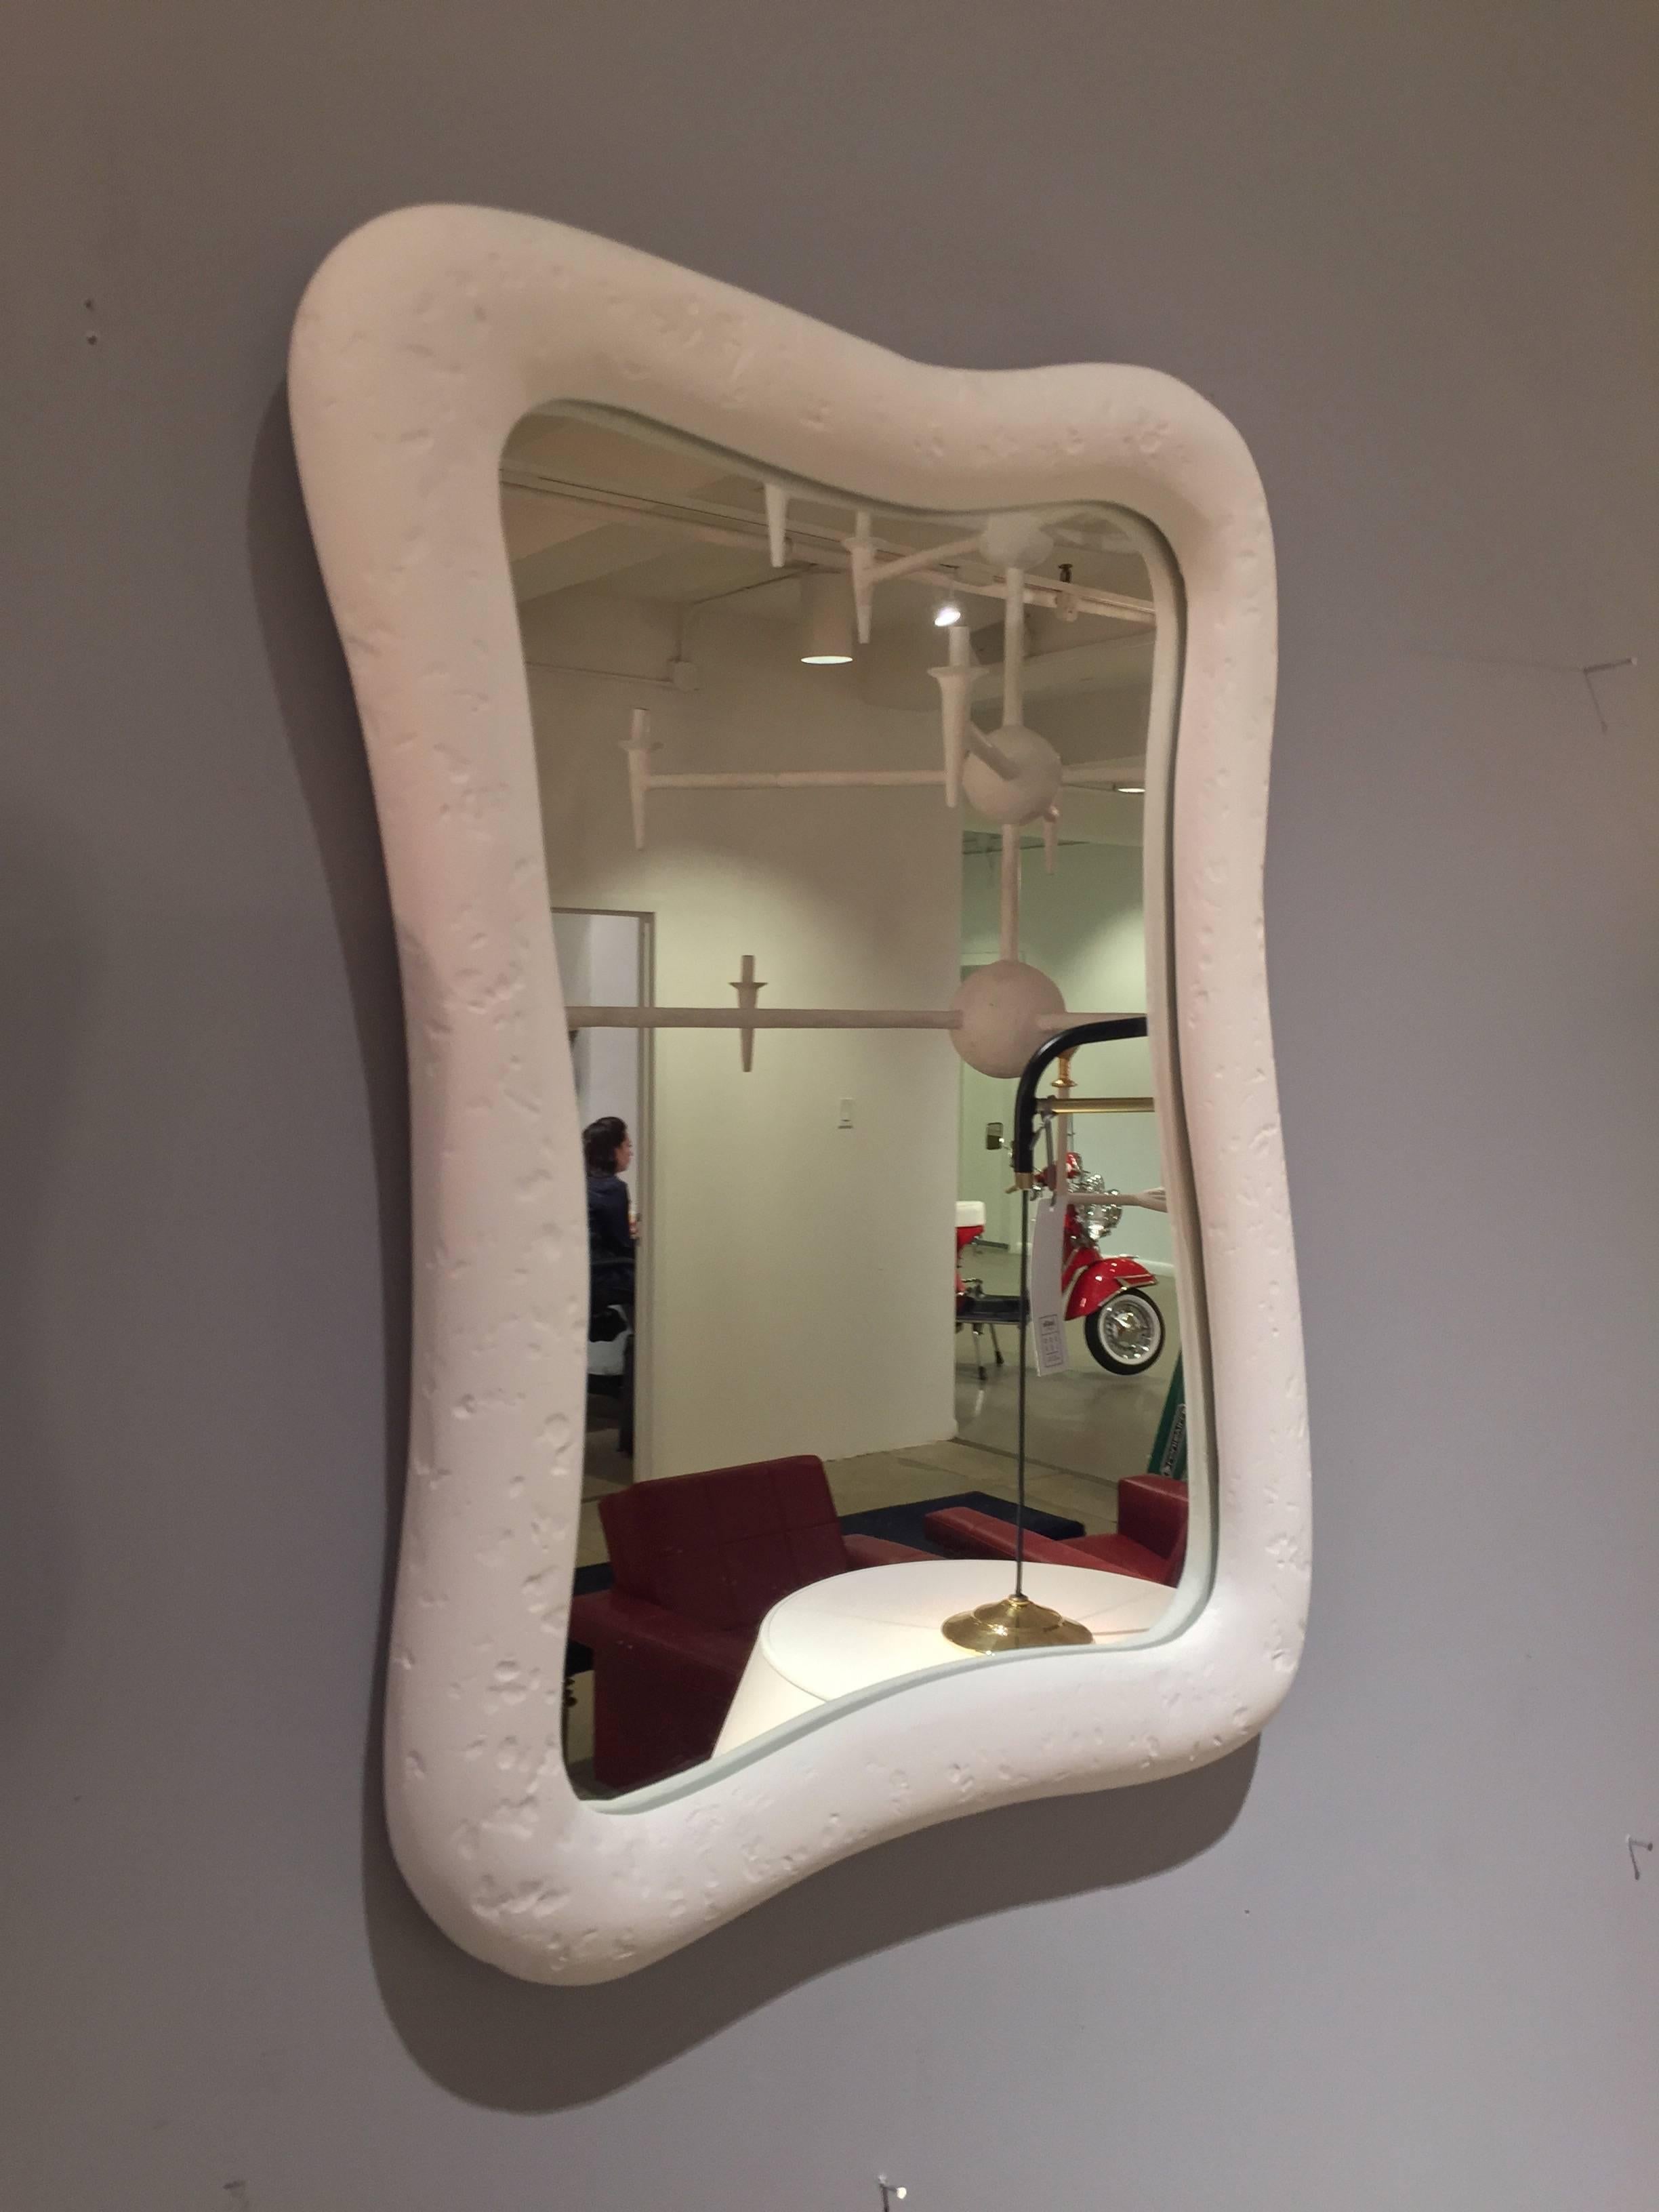 Collection of Eight Republique Mirrors by Bourgeois Boheme Atelier 1